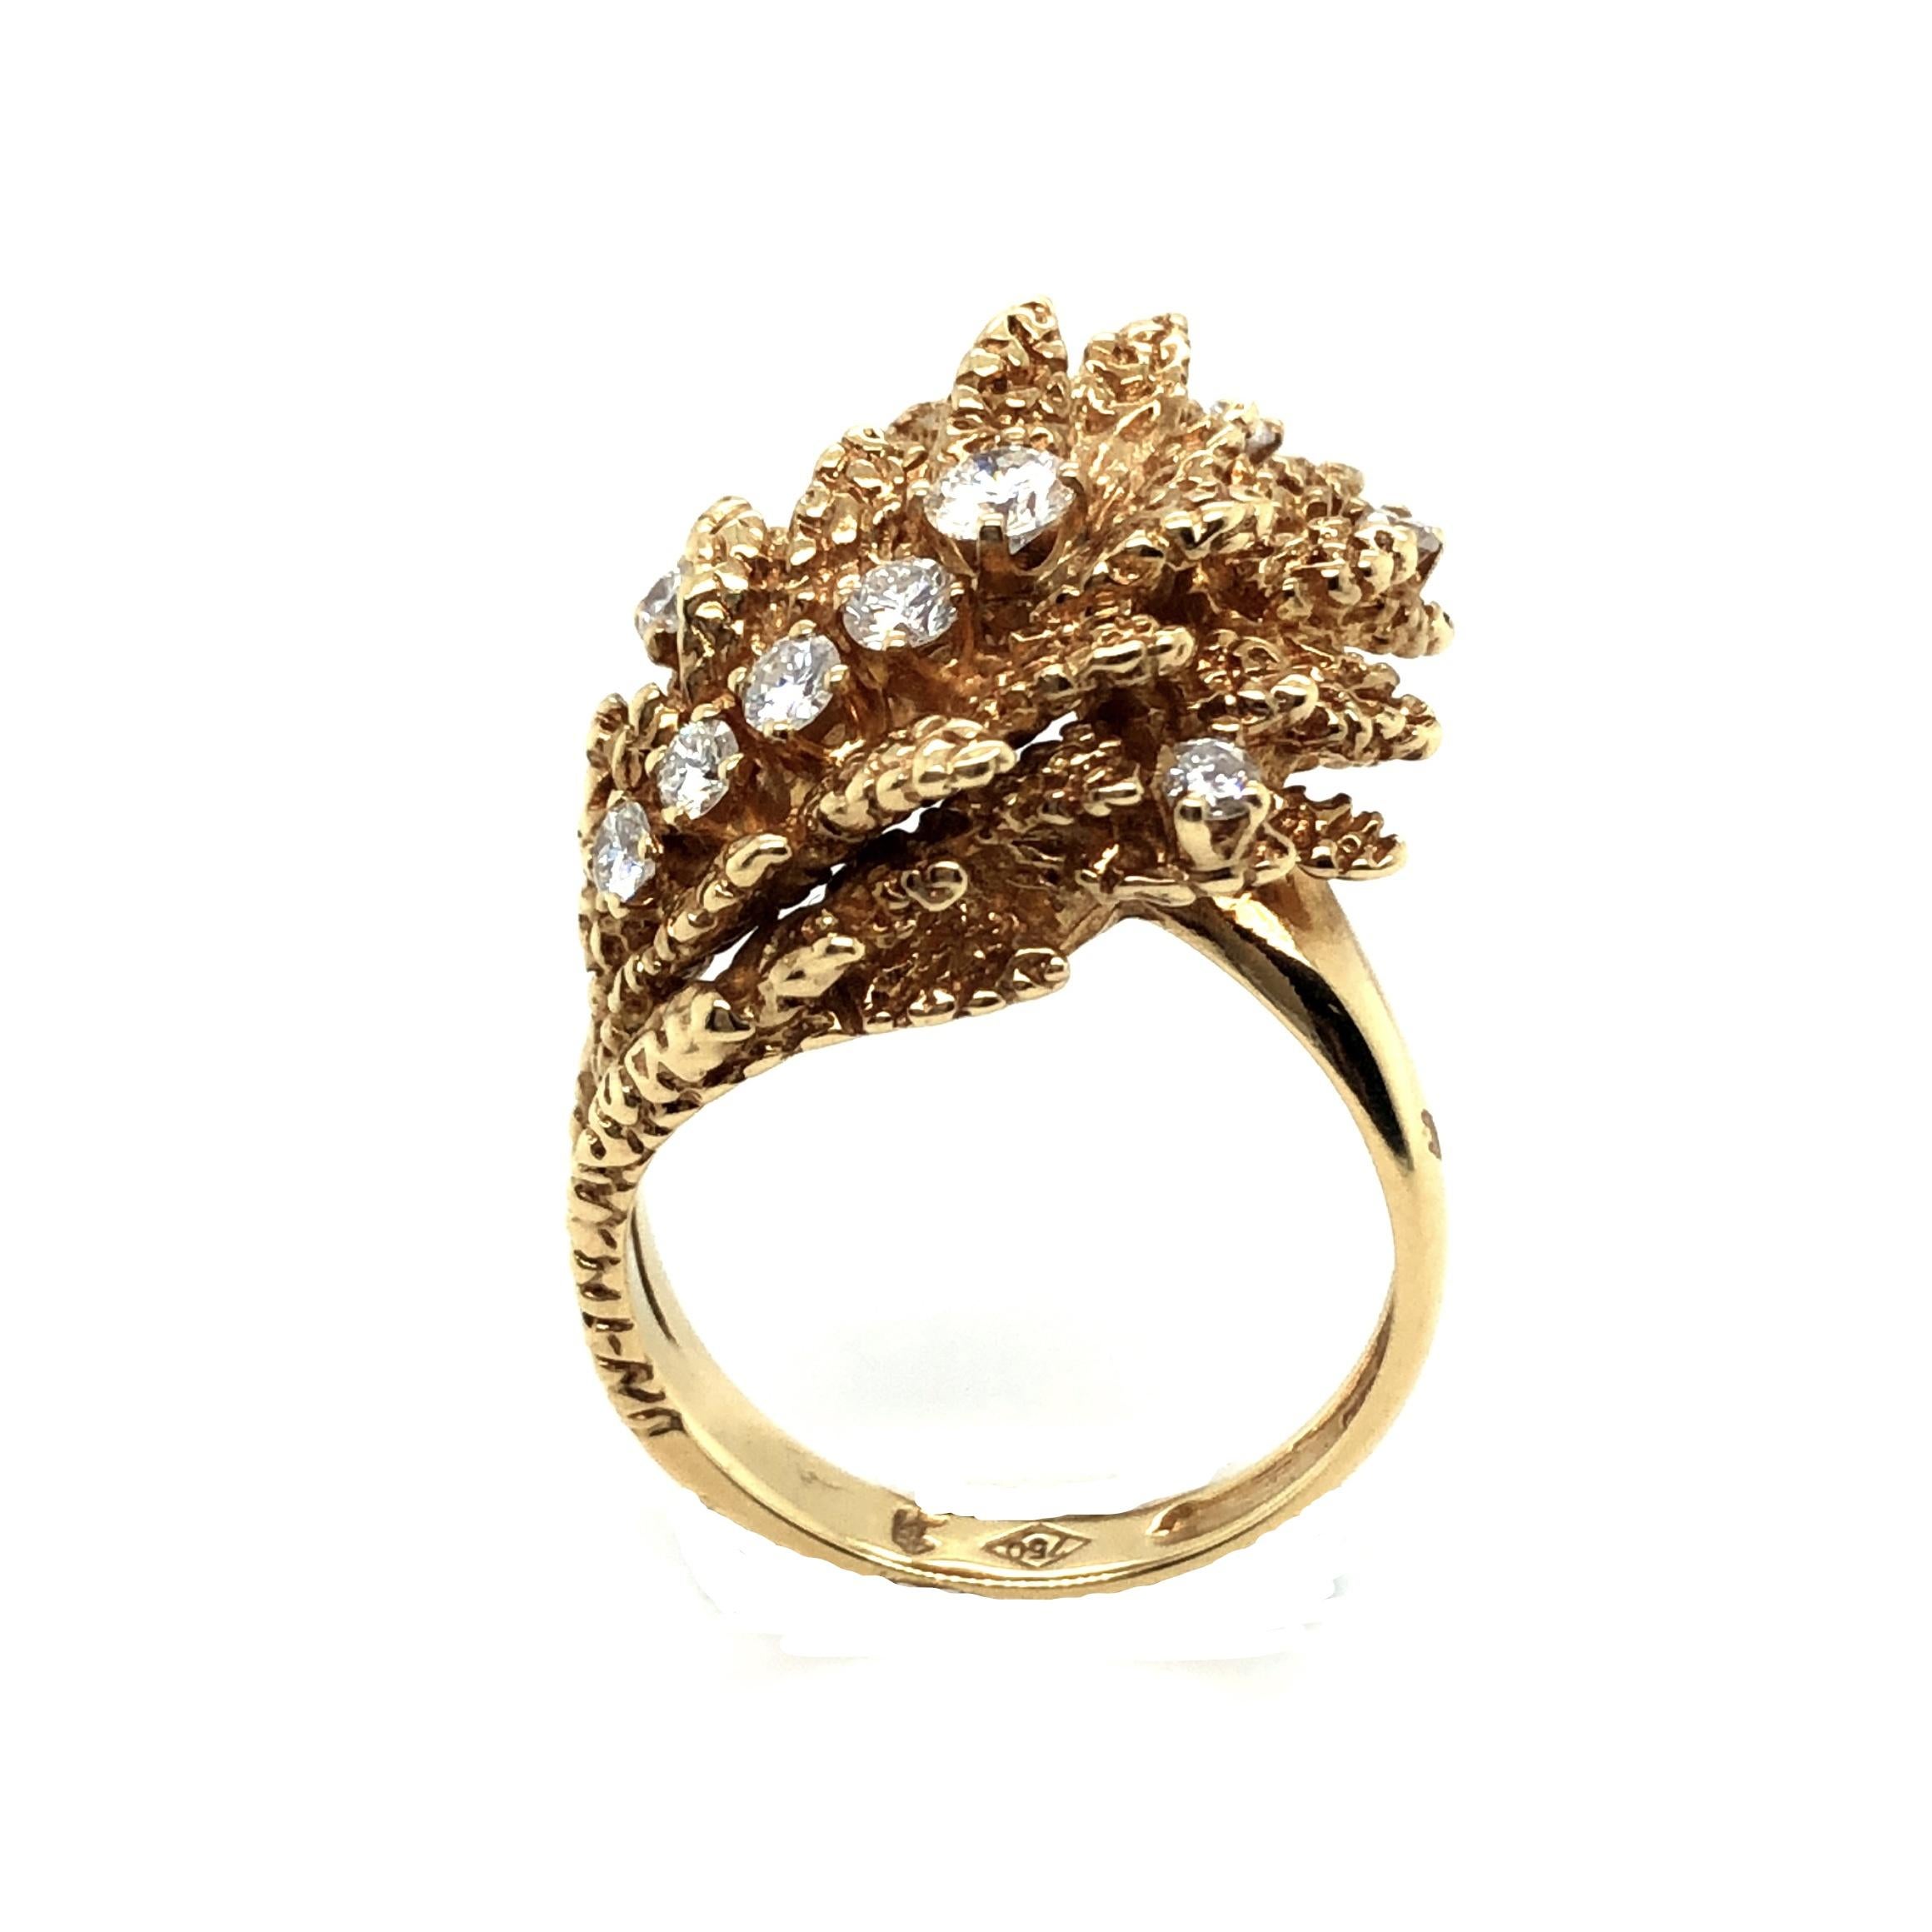 Ravishing 18 karat yellow gold and diamond dress/cocktail ring, circa 1970.
Of abstract asymmetric floral design, the textured gold leaves highlighted with 10 brilliant-cut diamonds totalling circa 0.5 carats.
This jewel is in very good vintage